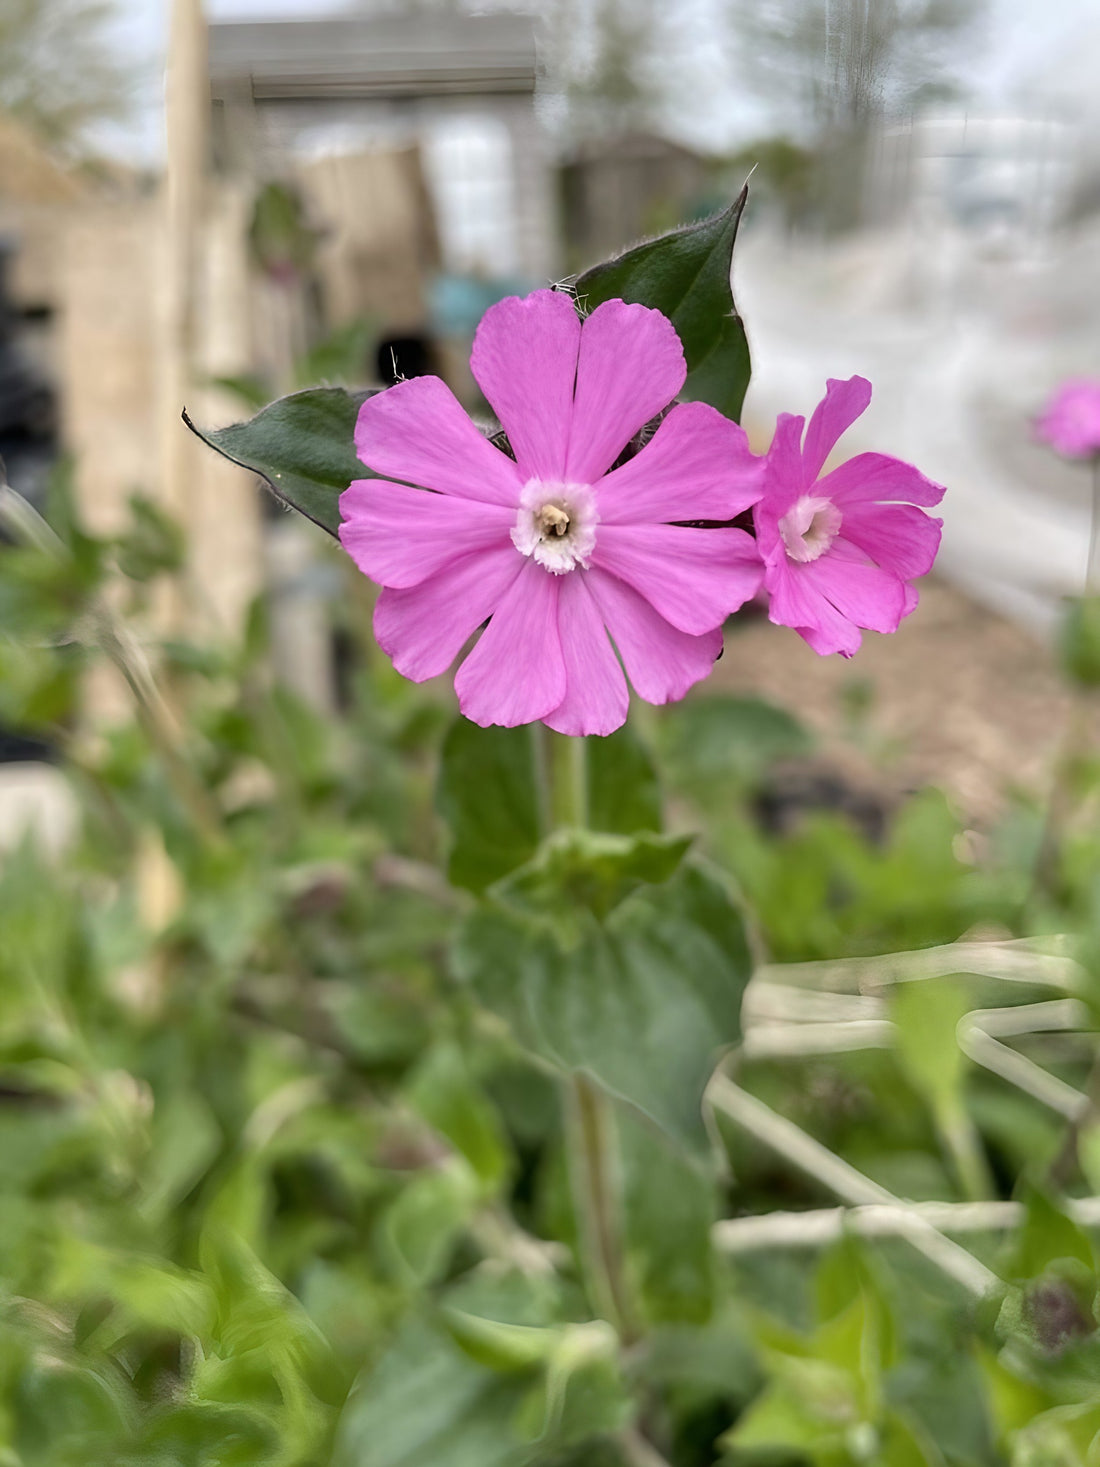 Red Campion flower with vibrant pink petals surrounded by green foliage